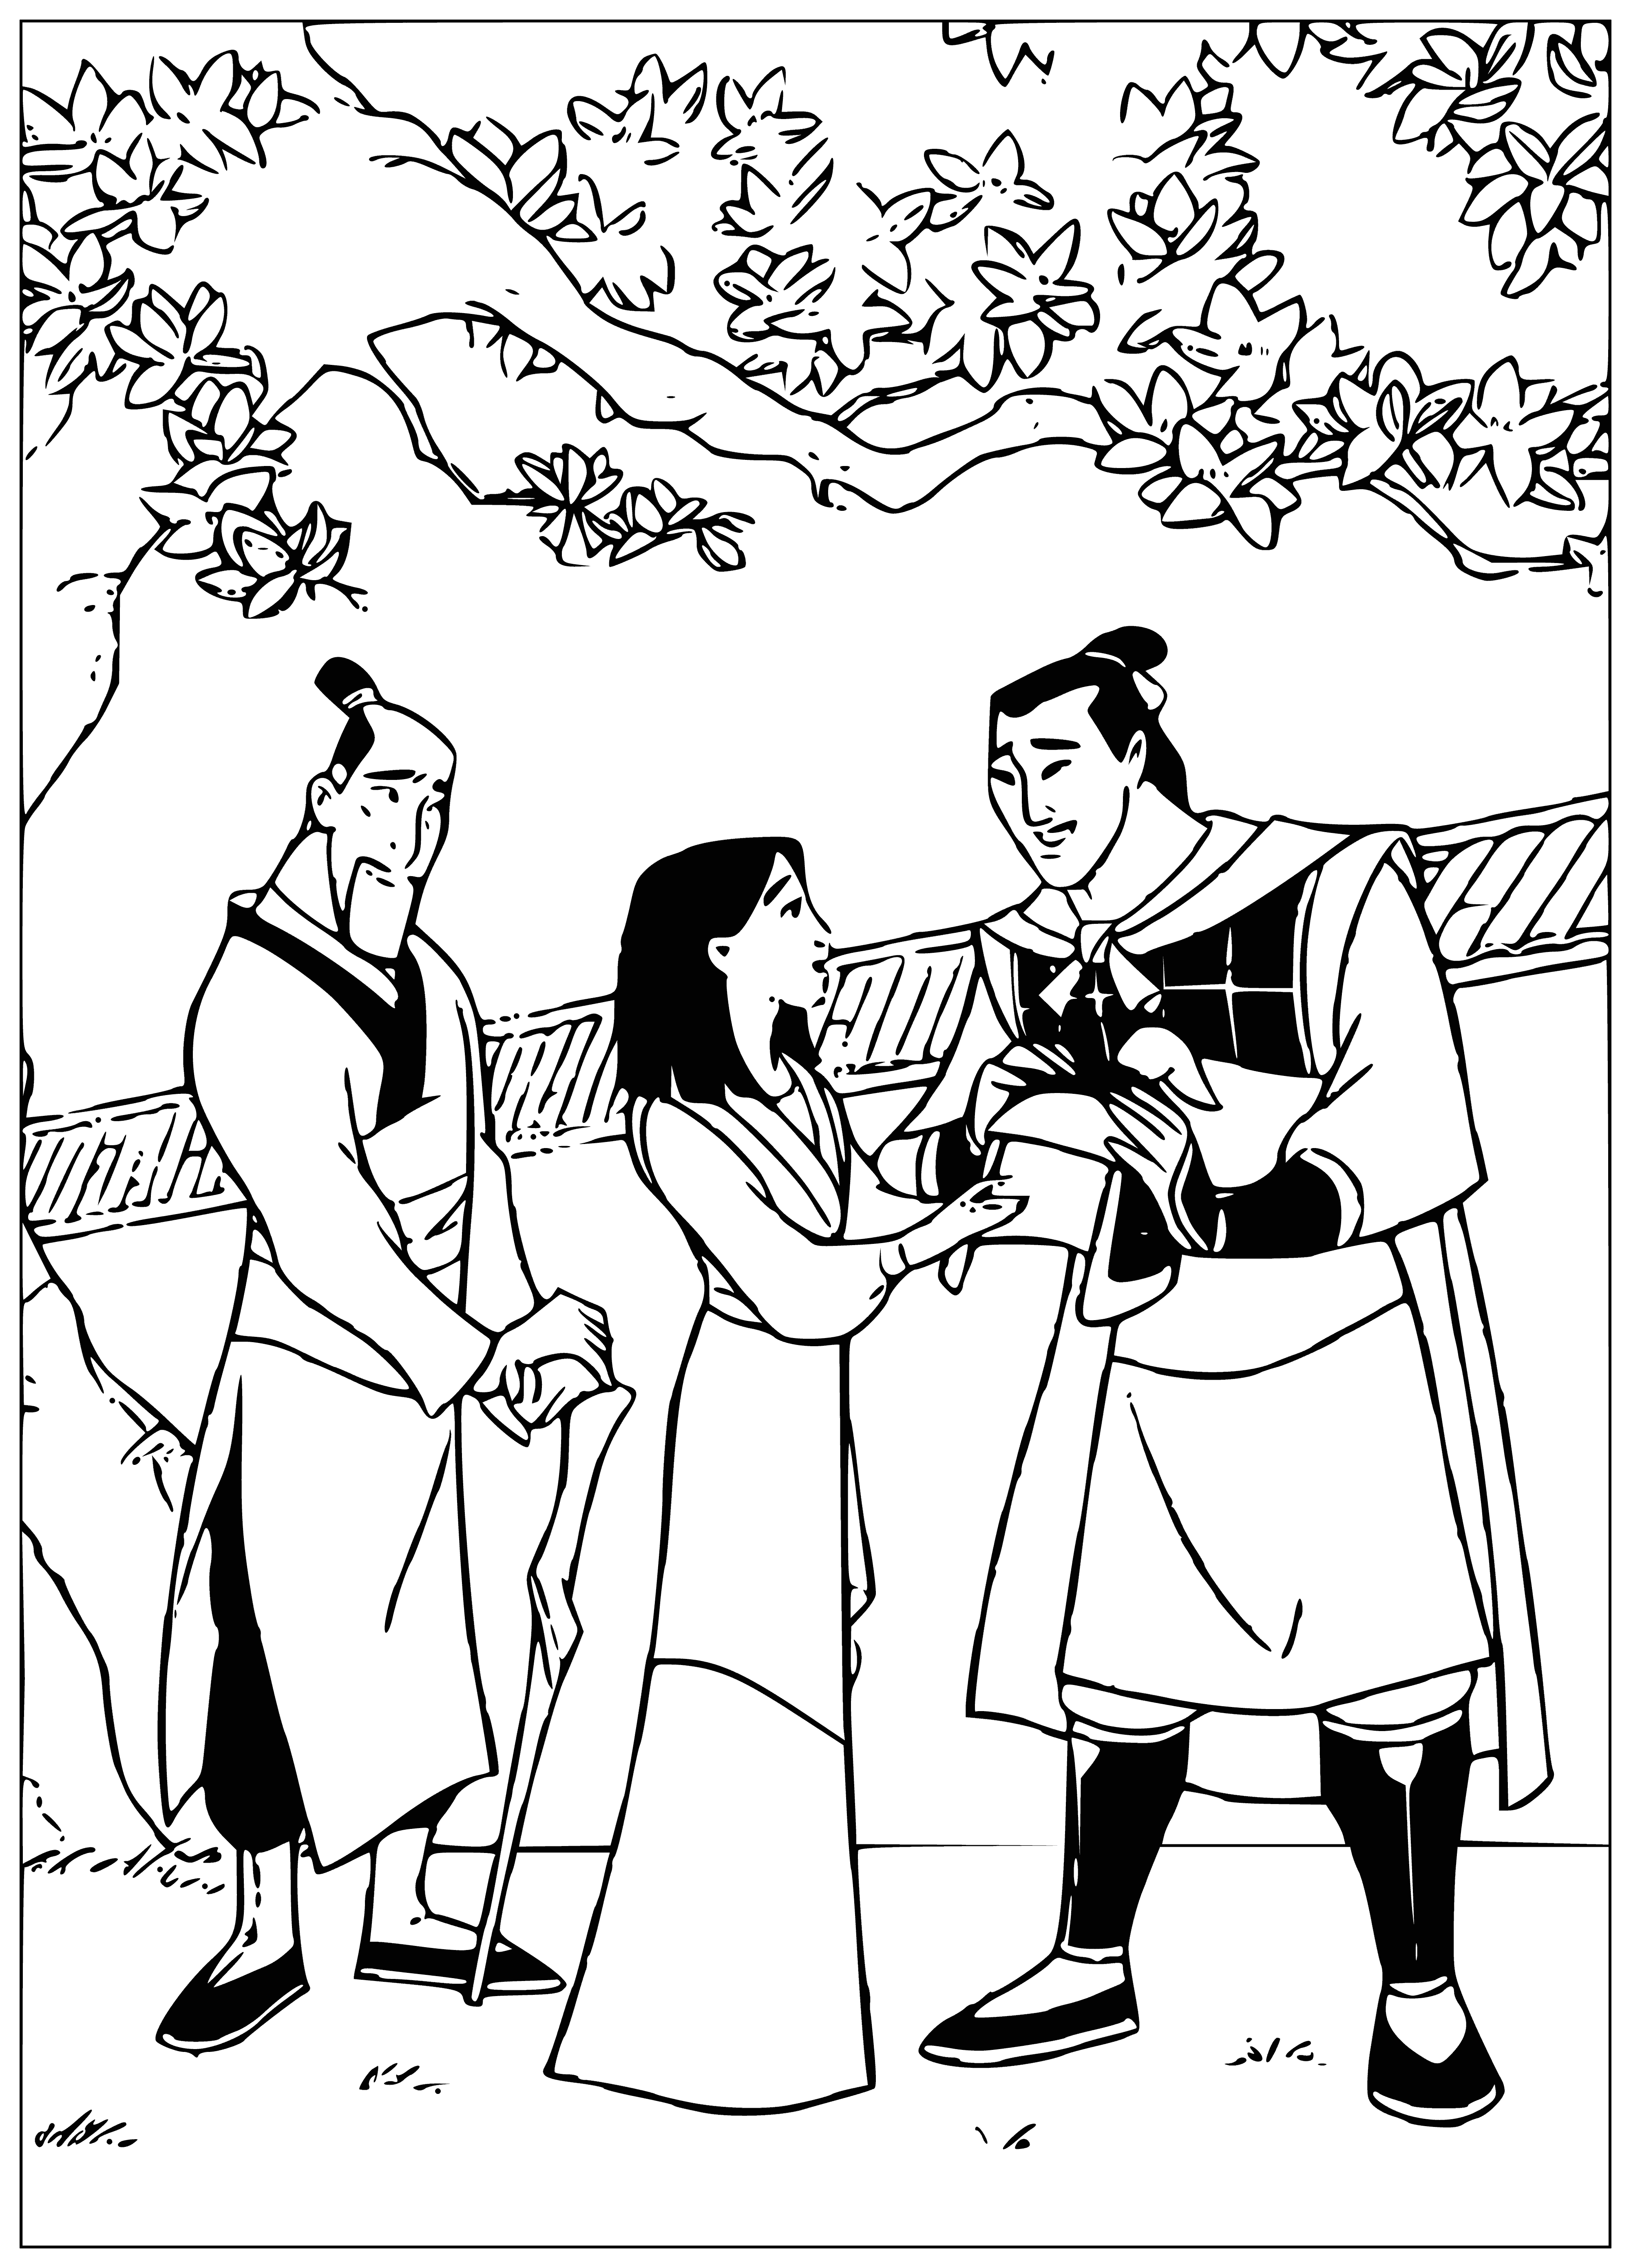 coloring page: Woman in brown dress stands before man, who has arms crossed.